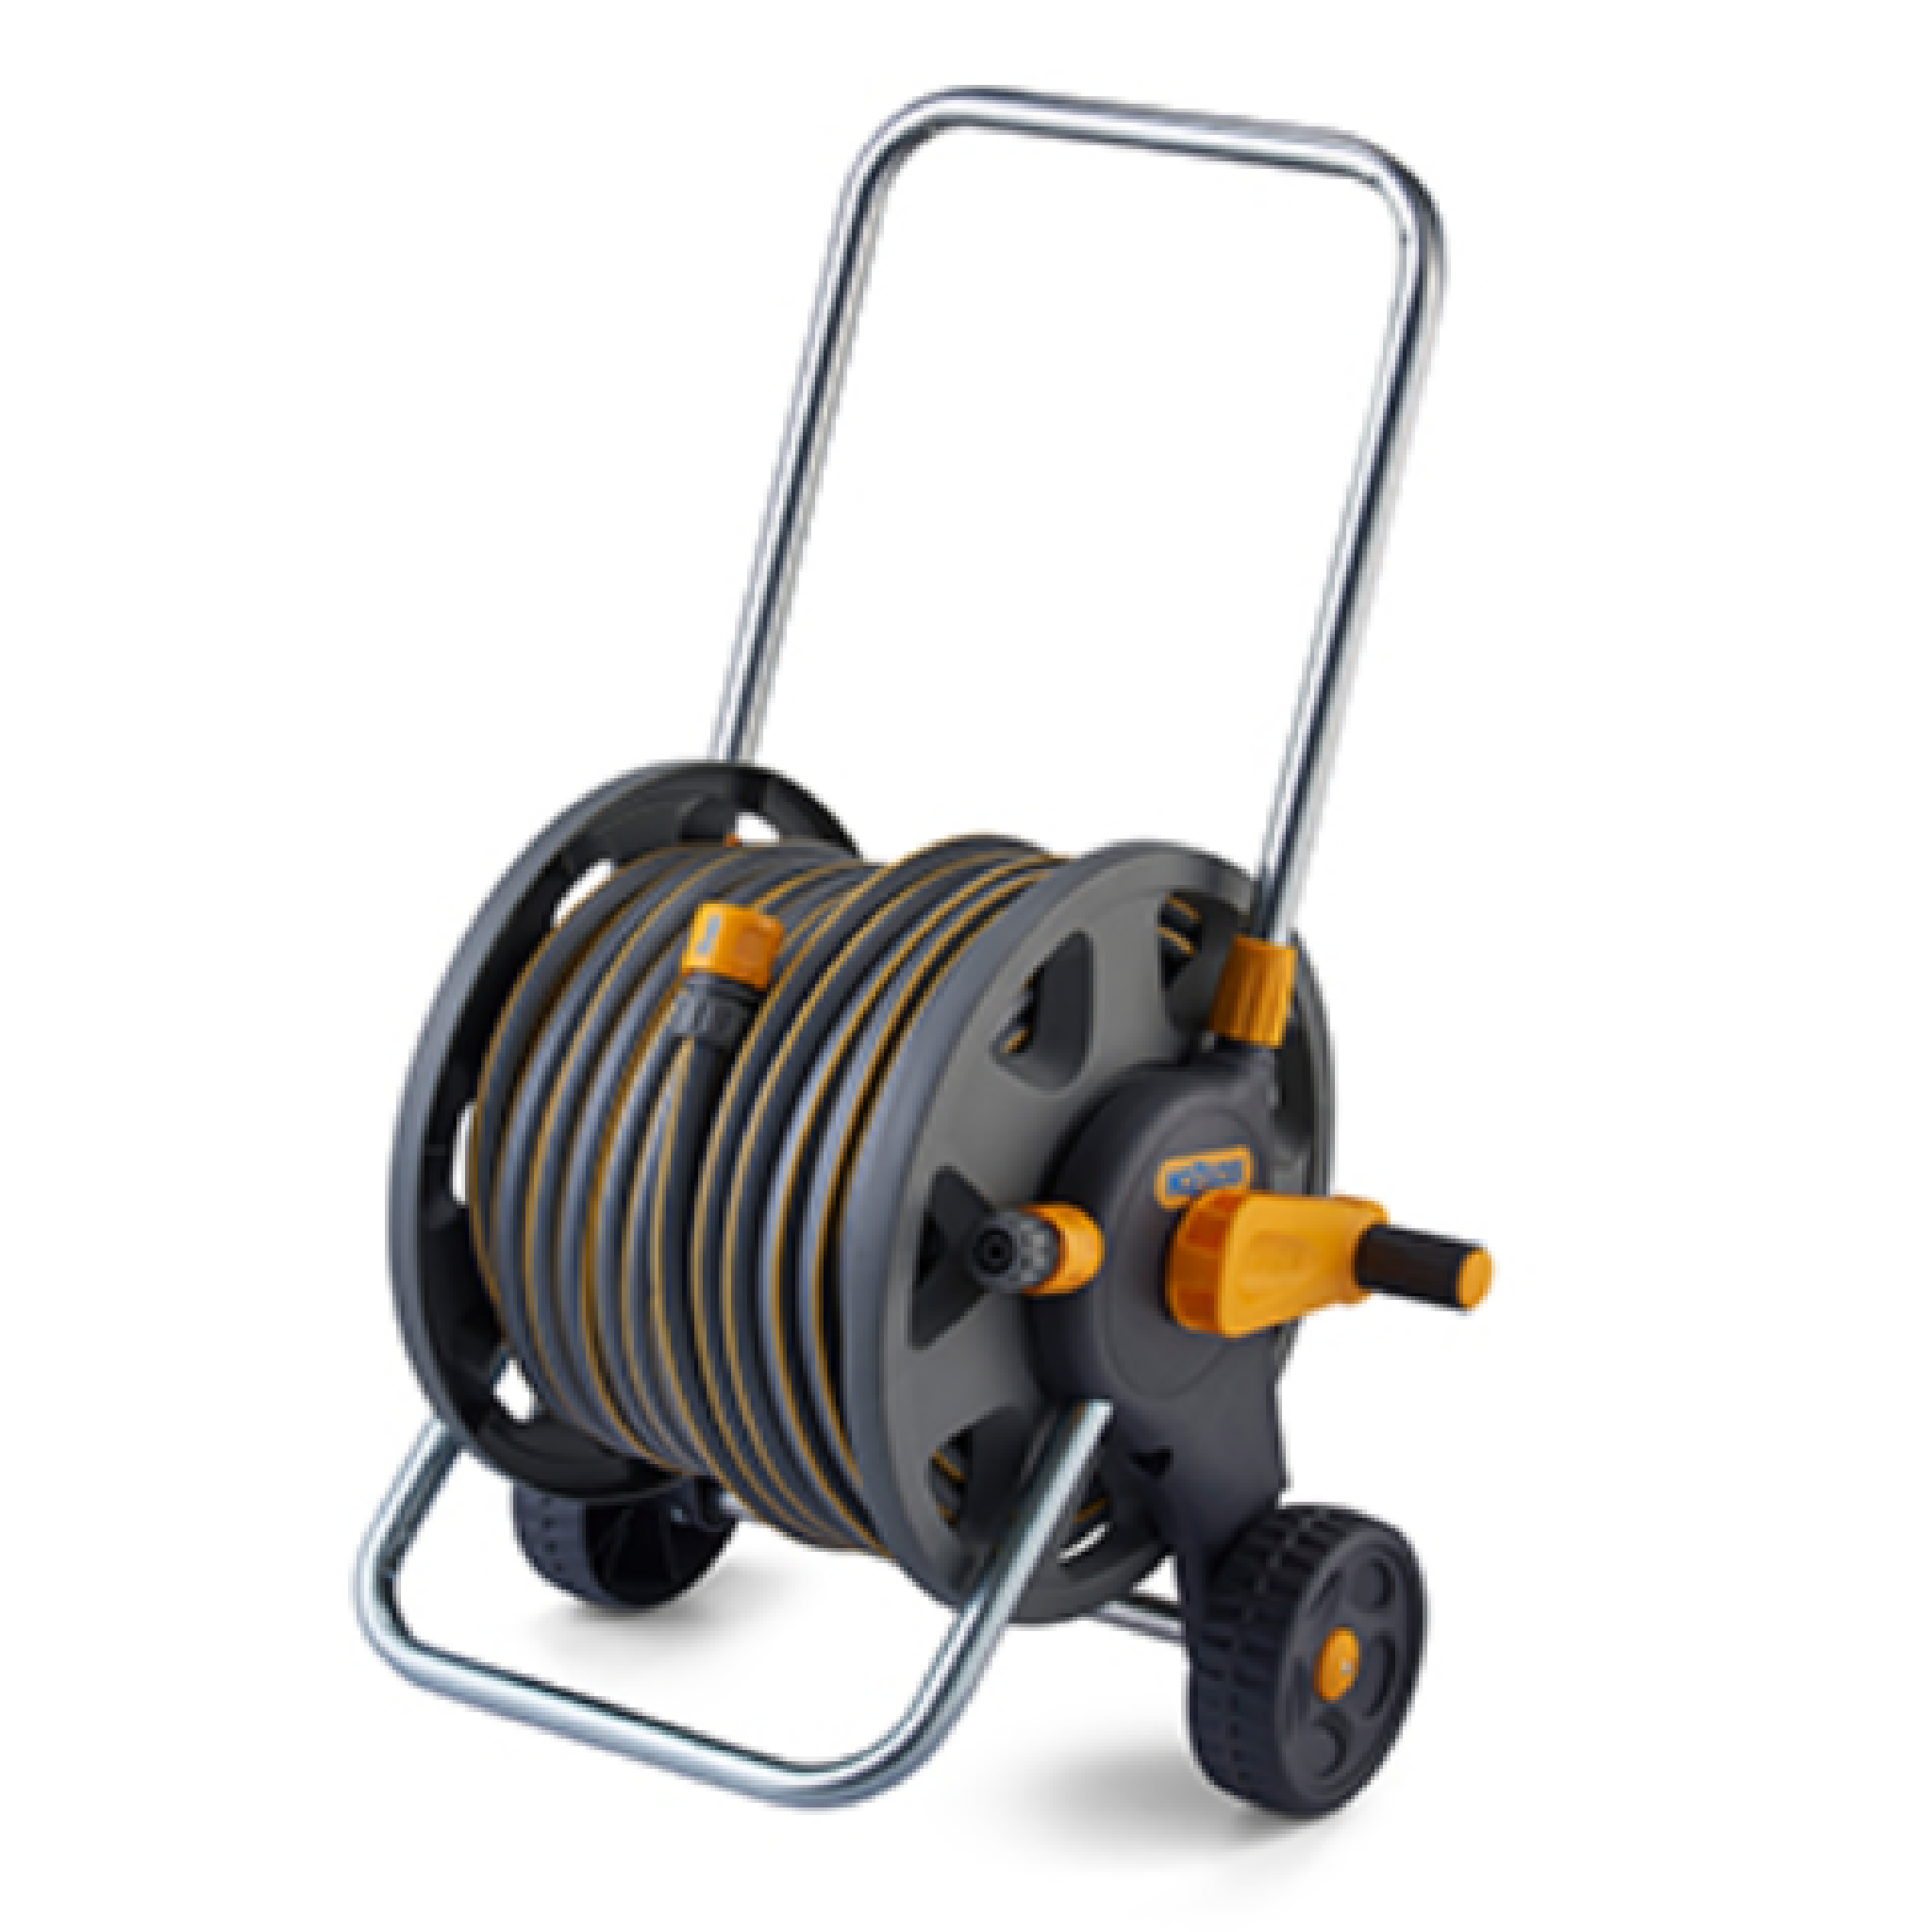 Hozelock 2398 With 30M MAXI-PRO SILVER Hose Reel Complete Set